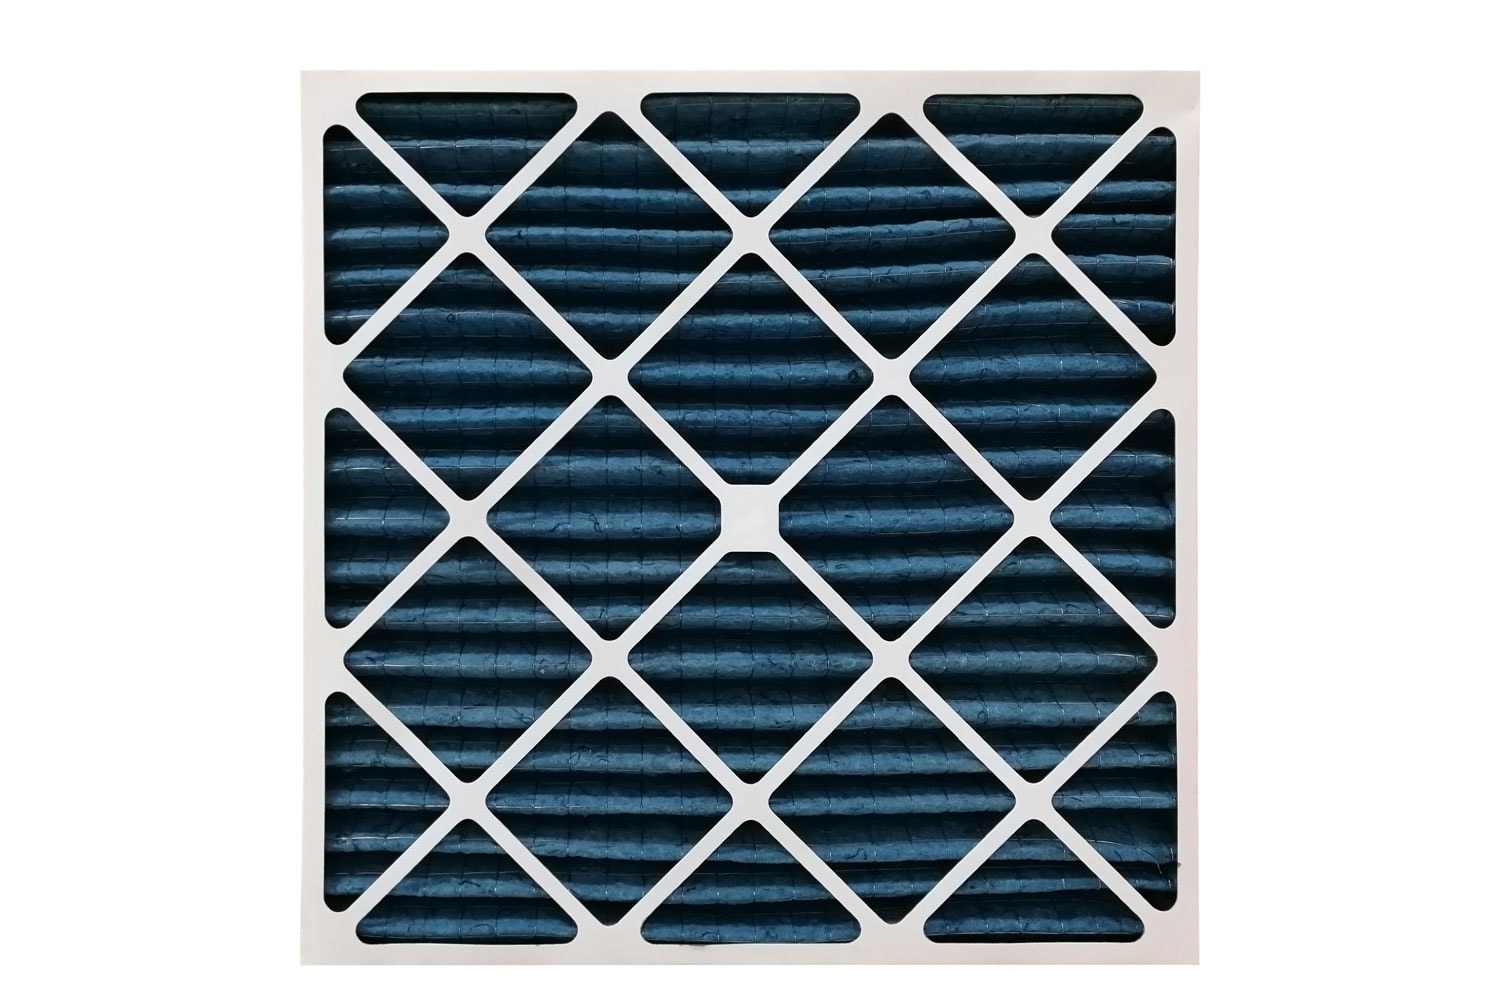 A vent air filter on a white background